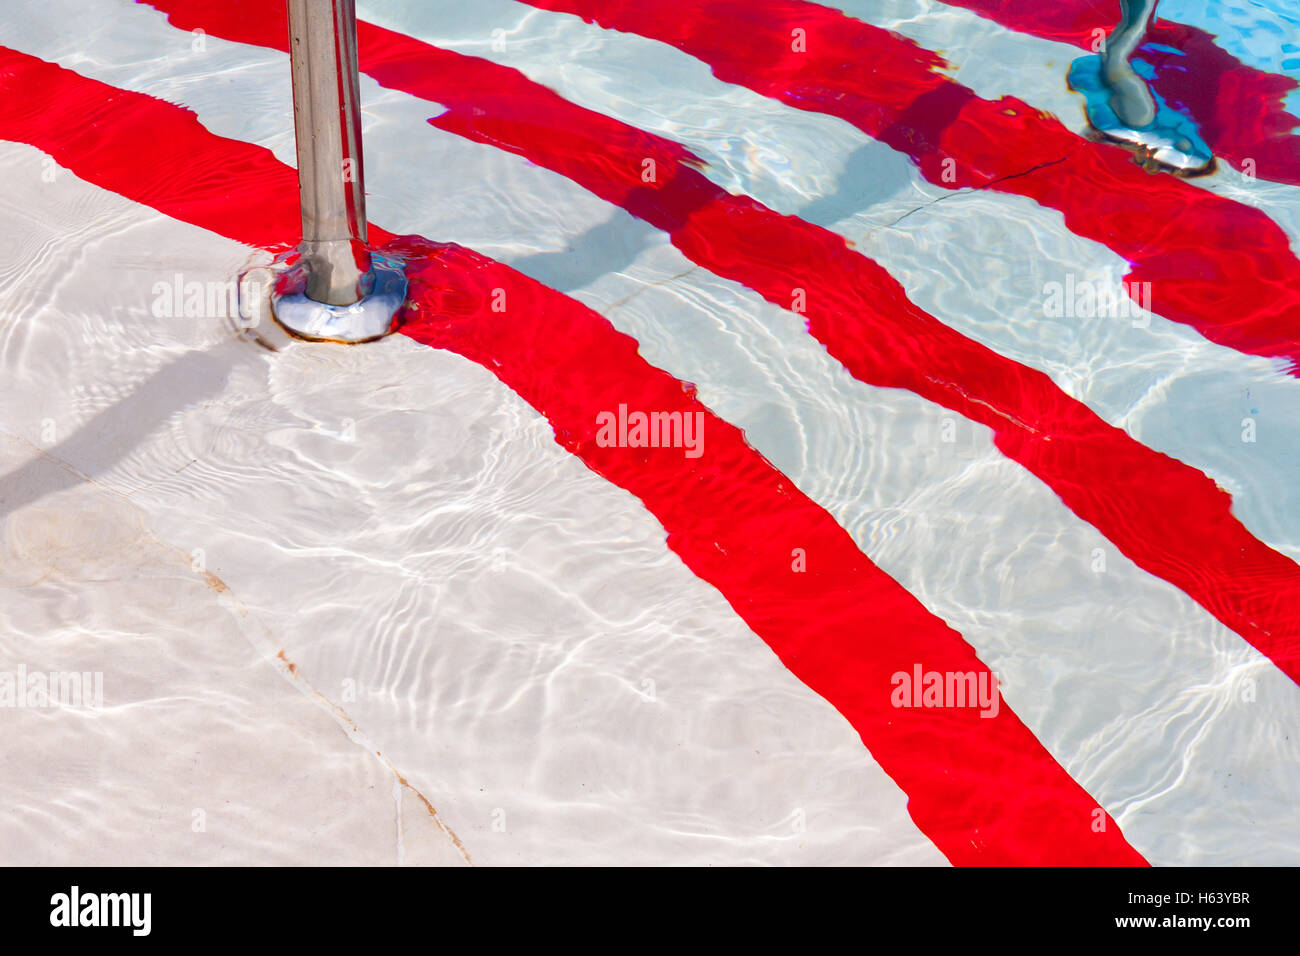 red and white striped swimming pool steps Stock Photo